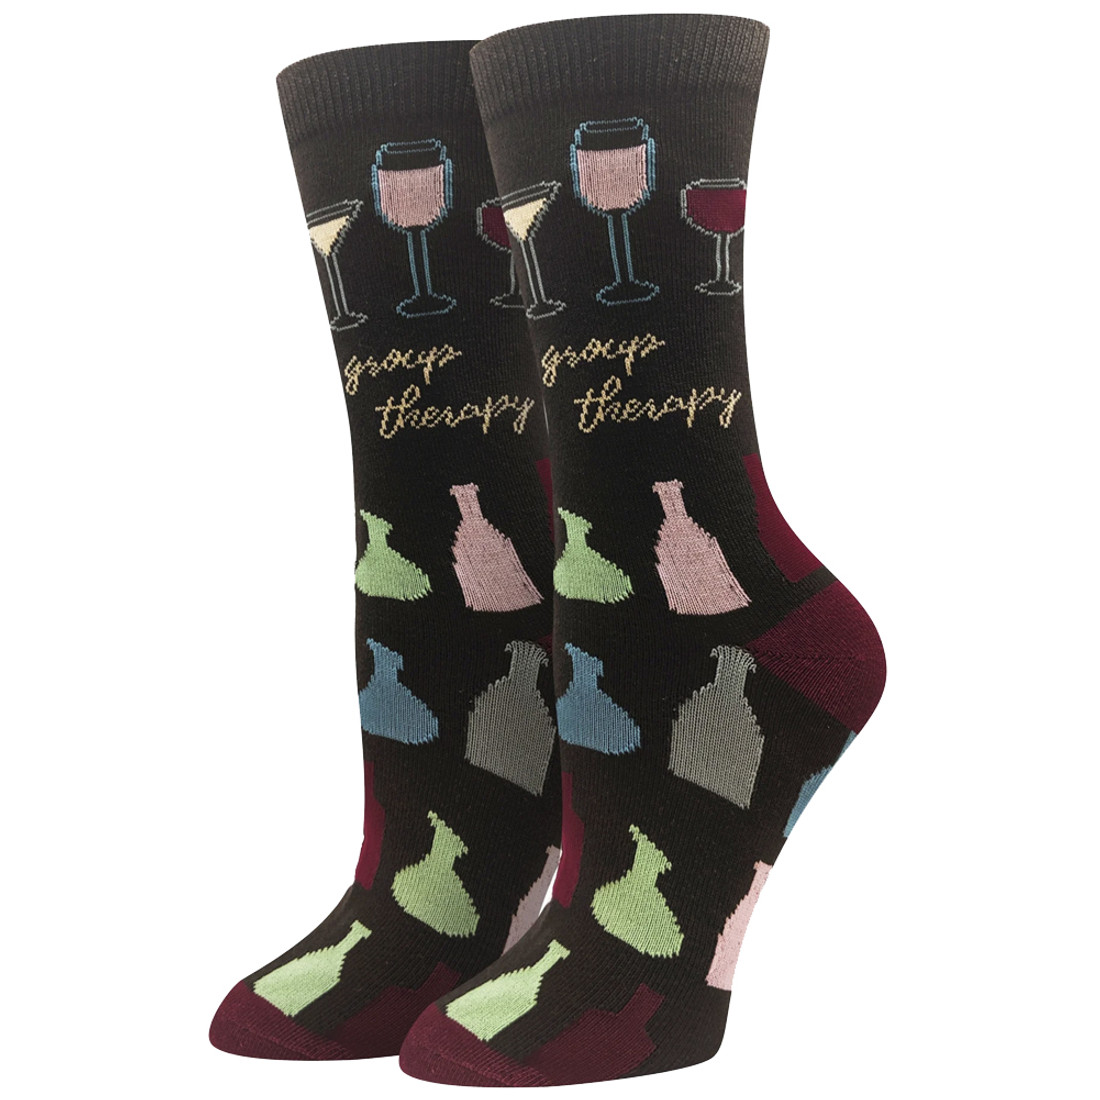 Group Therapy Wine Women's Socks